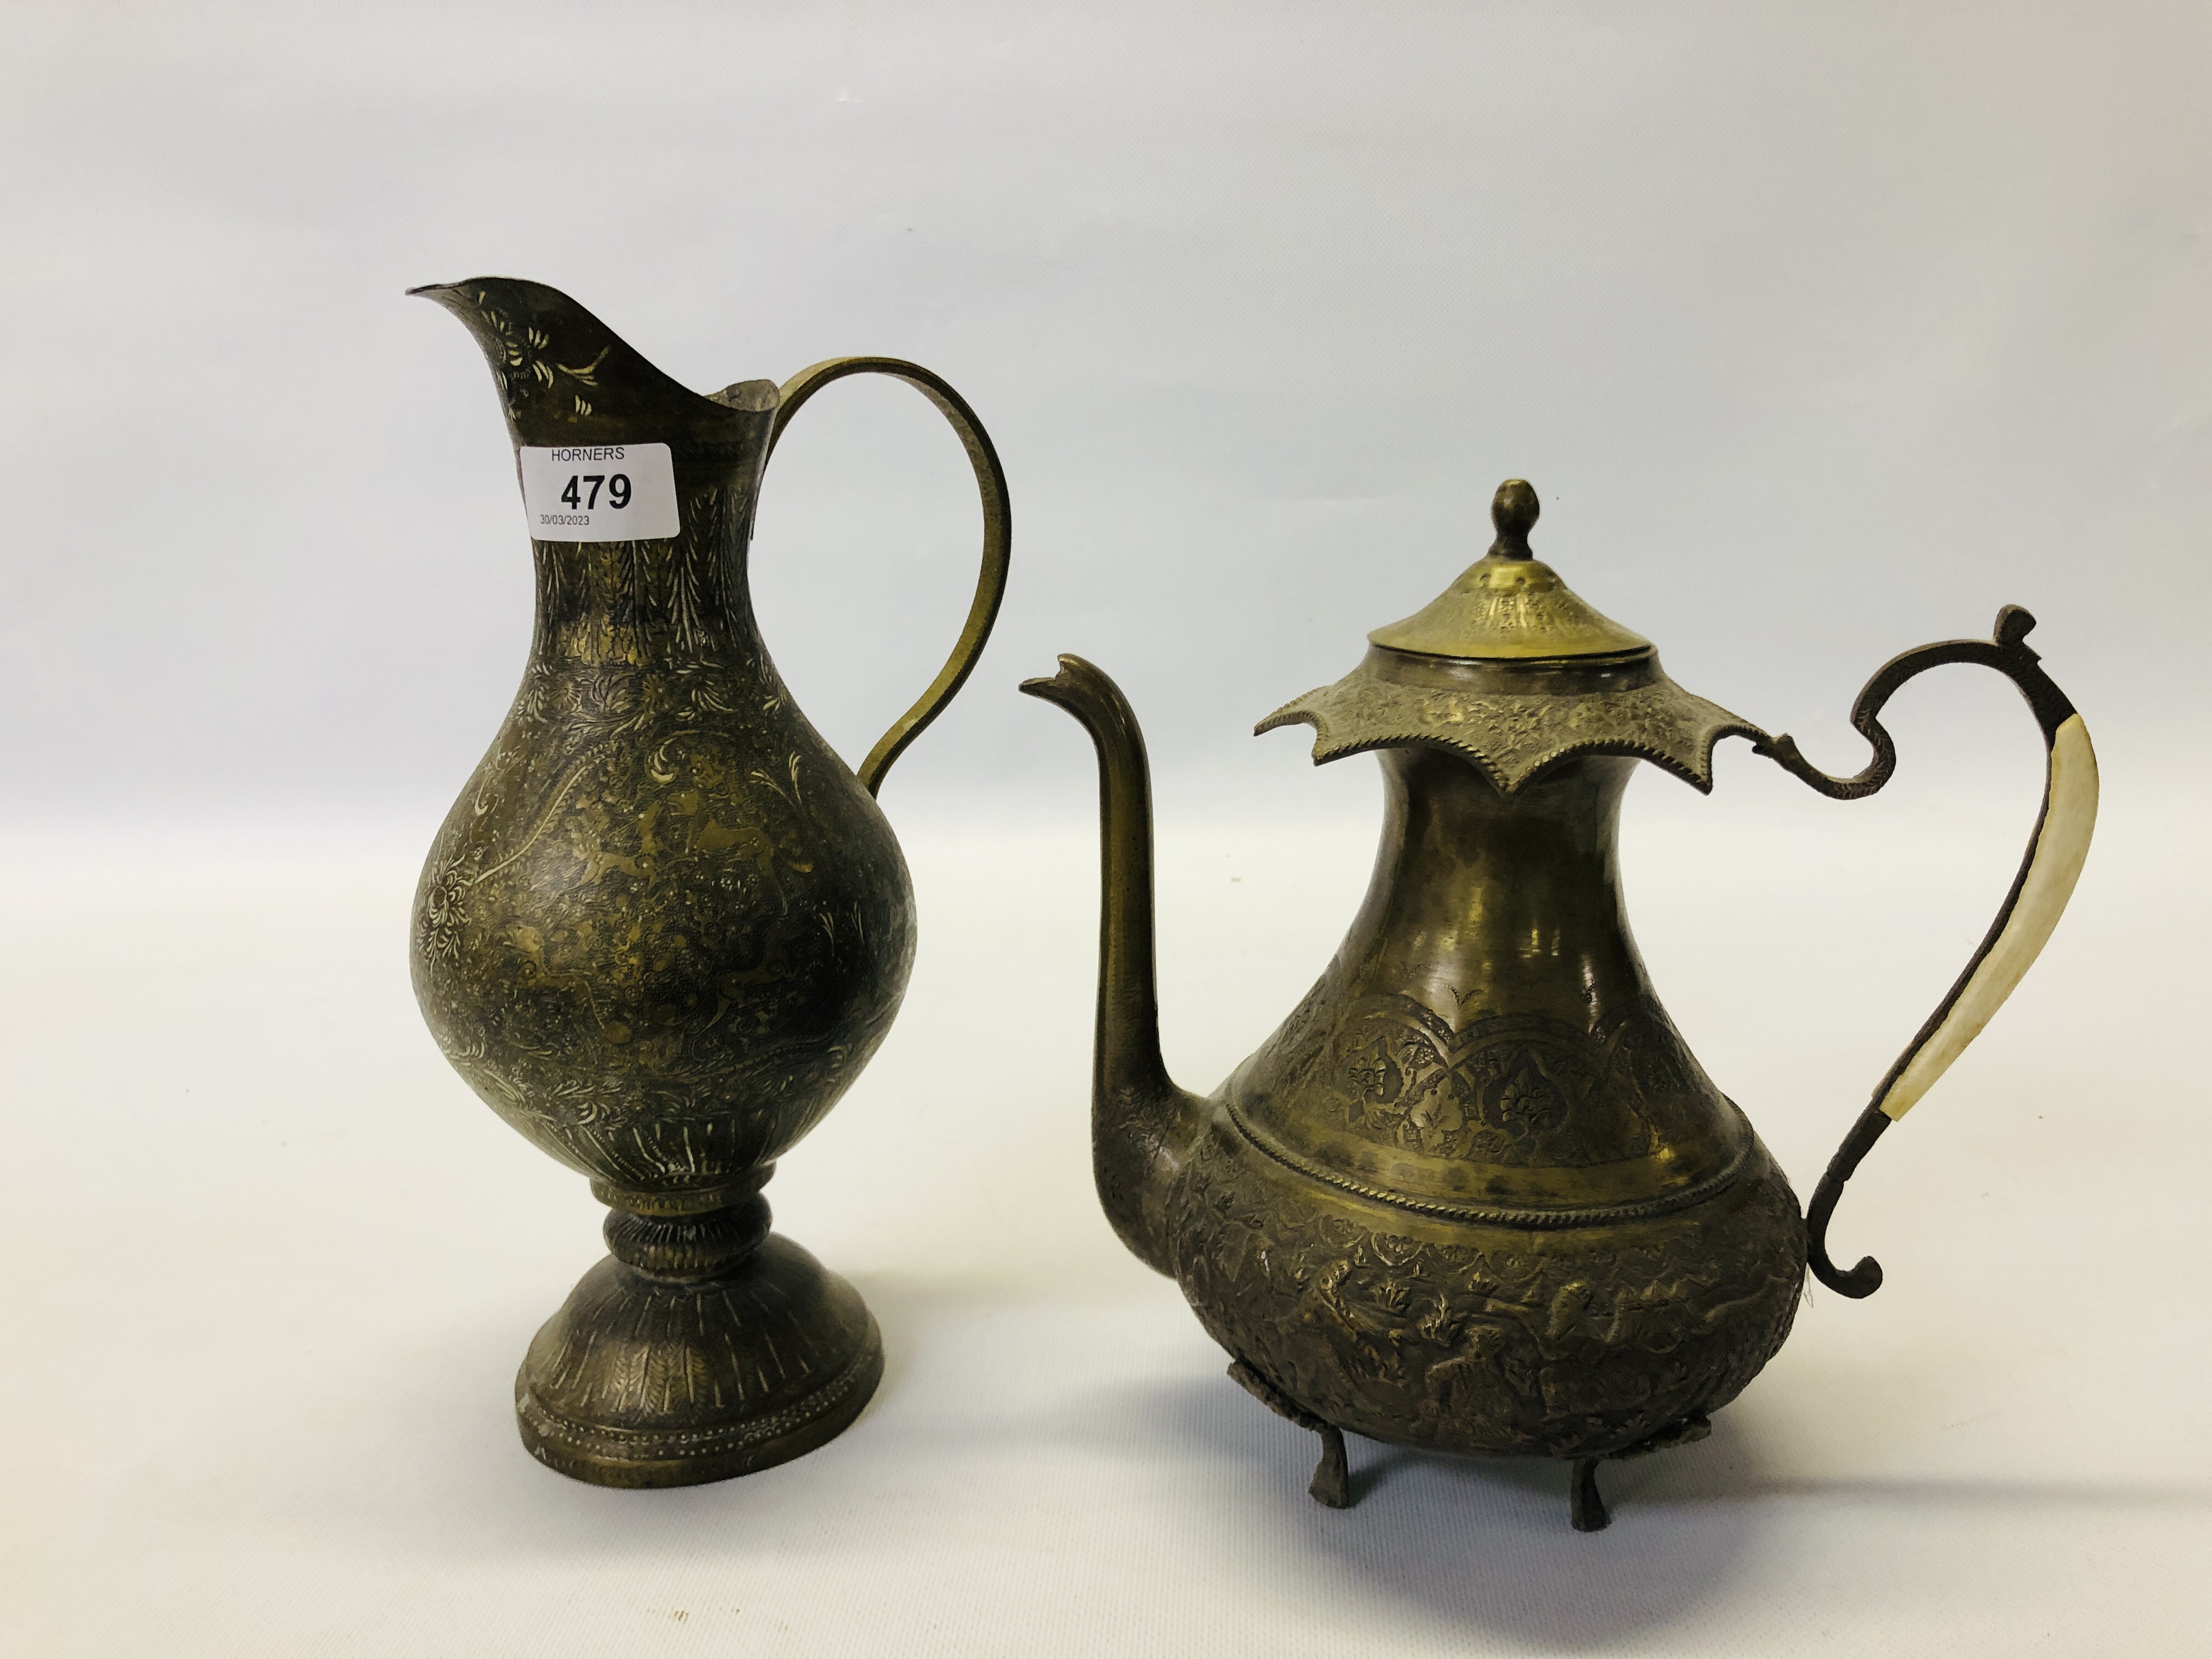 A VINTAGE MIDDLE EASTERN BRASS EWER ALONG WITH AN ELABORATE MIDDLE EASTERN BRASS COFFEE POT.